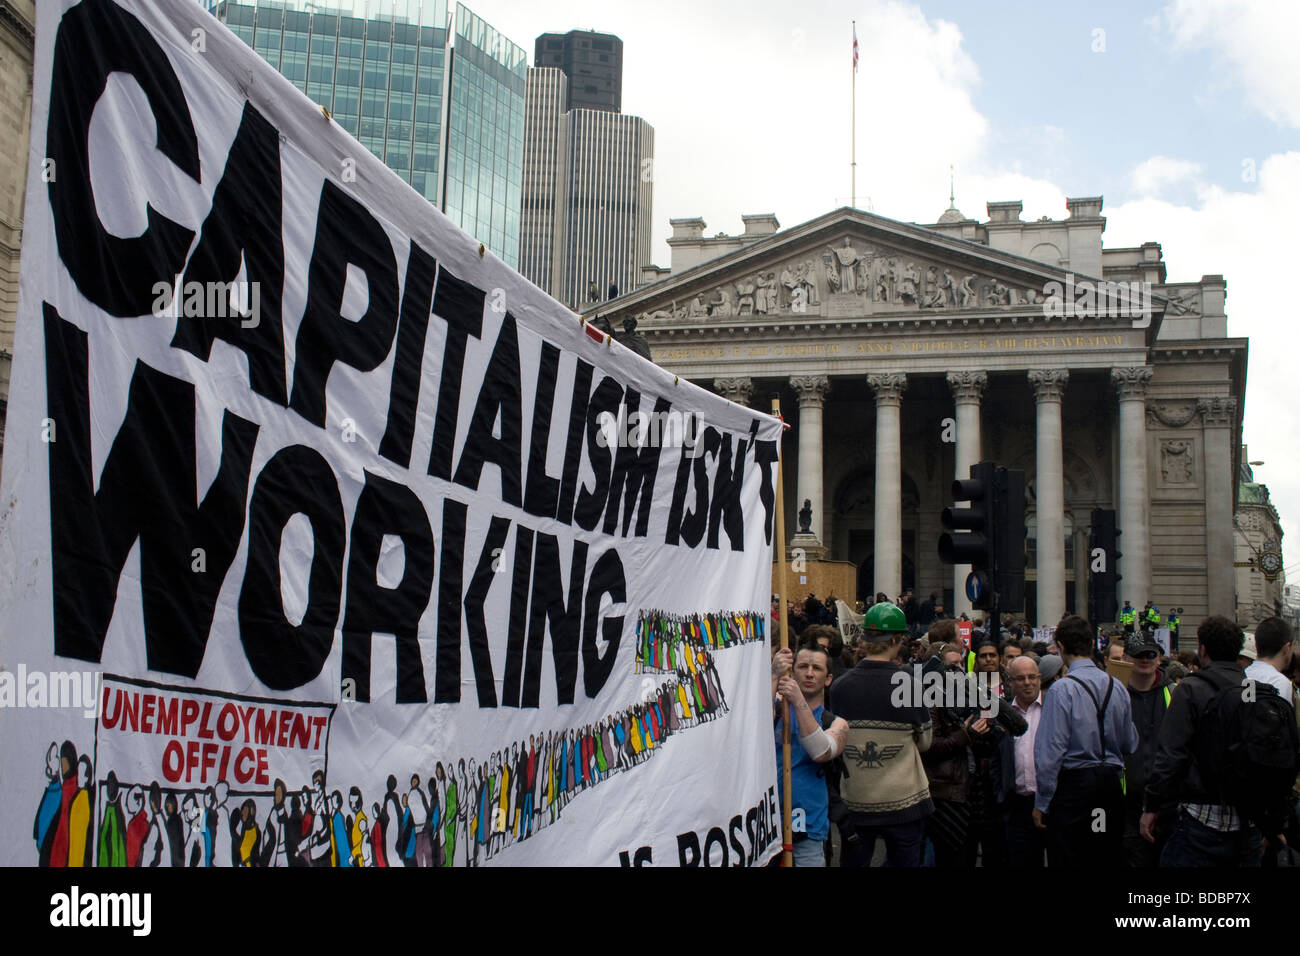 Capitalism isn't working banner at the G20 protest outside the Bank of England, April 1st 2009. Stock Photo